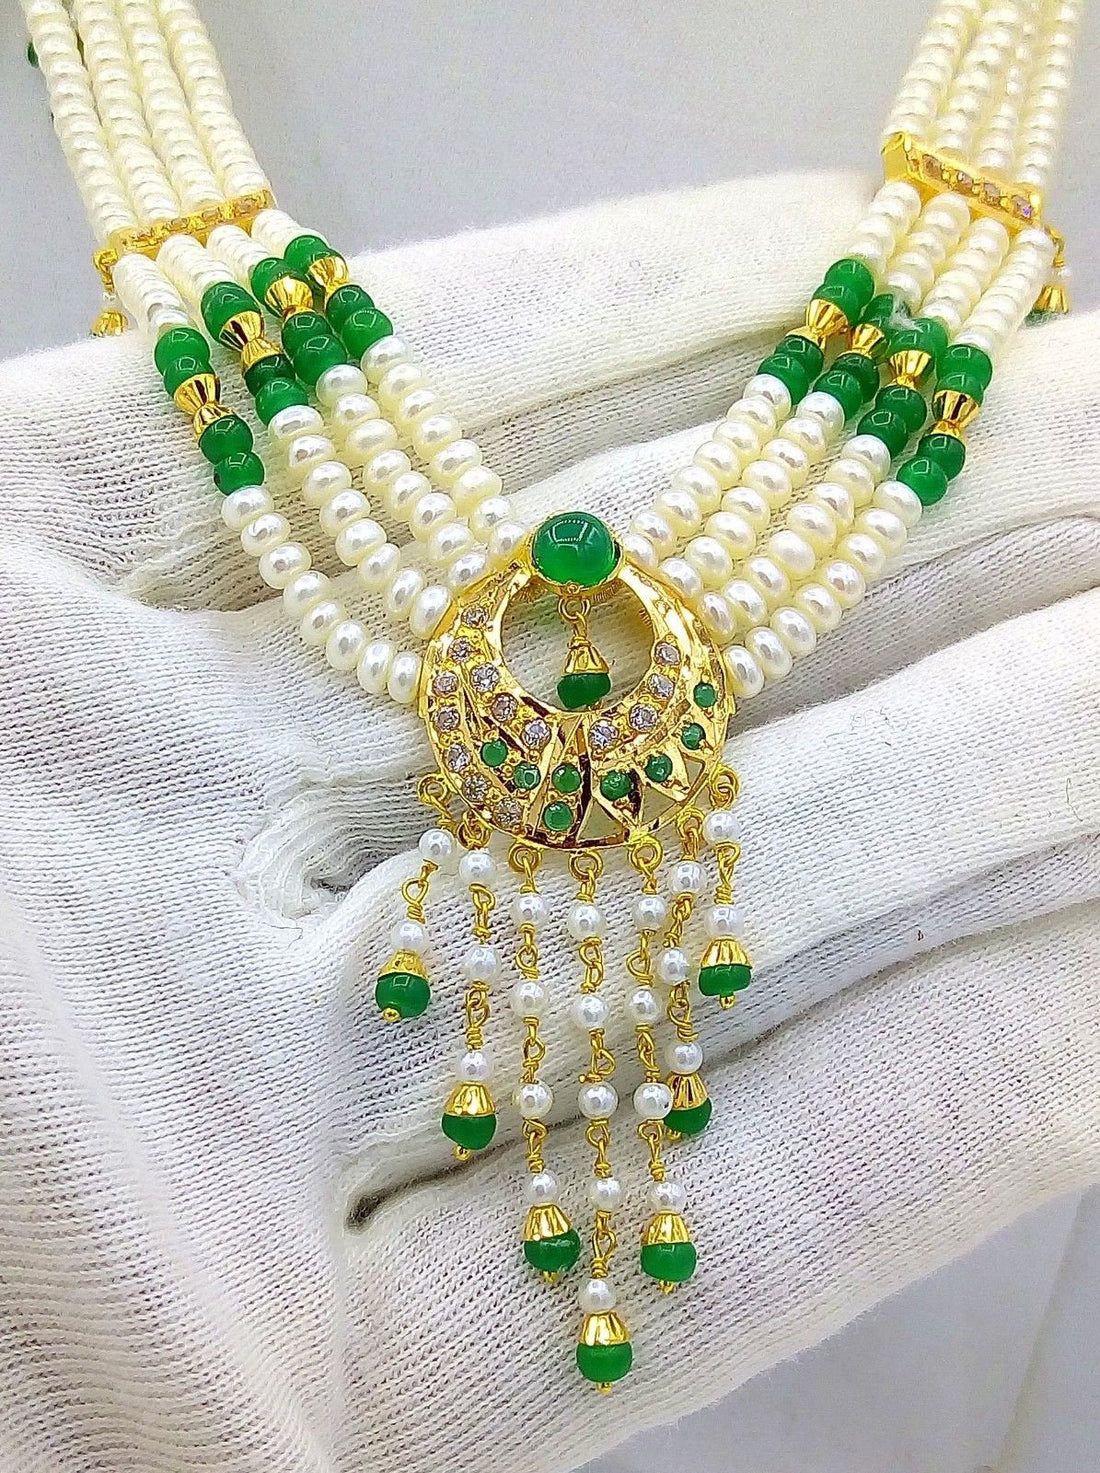 Muslim Pearl bead necklace 22k 22ct gold emerald color loose set with earrings green - TRIBAL ORNAMENTS